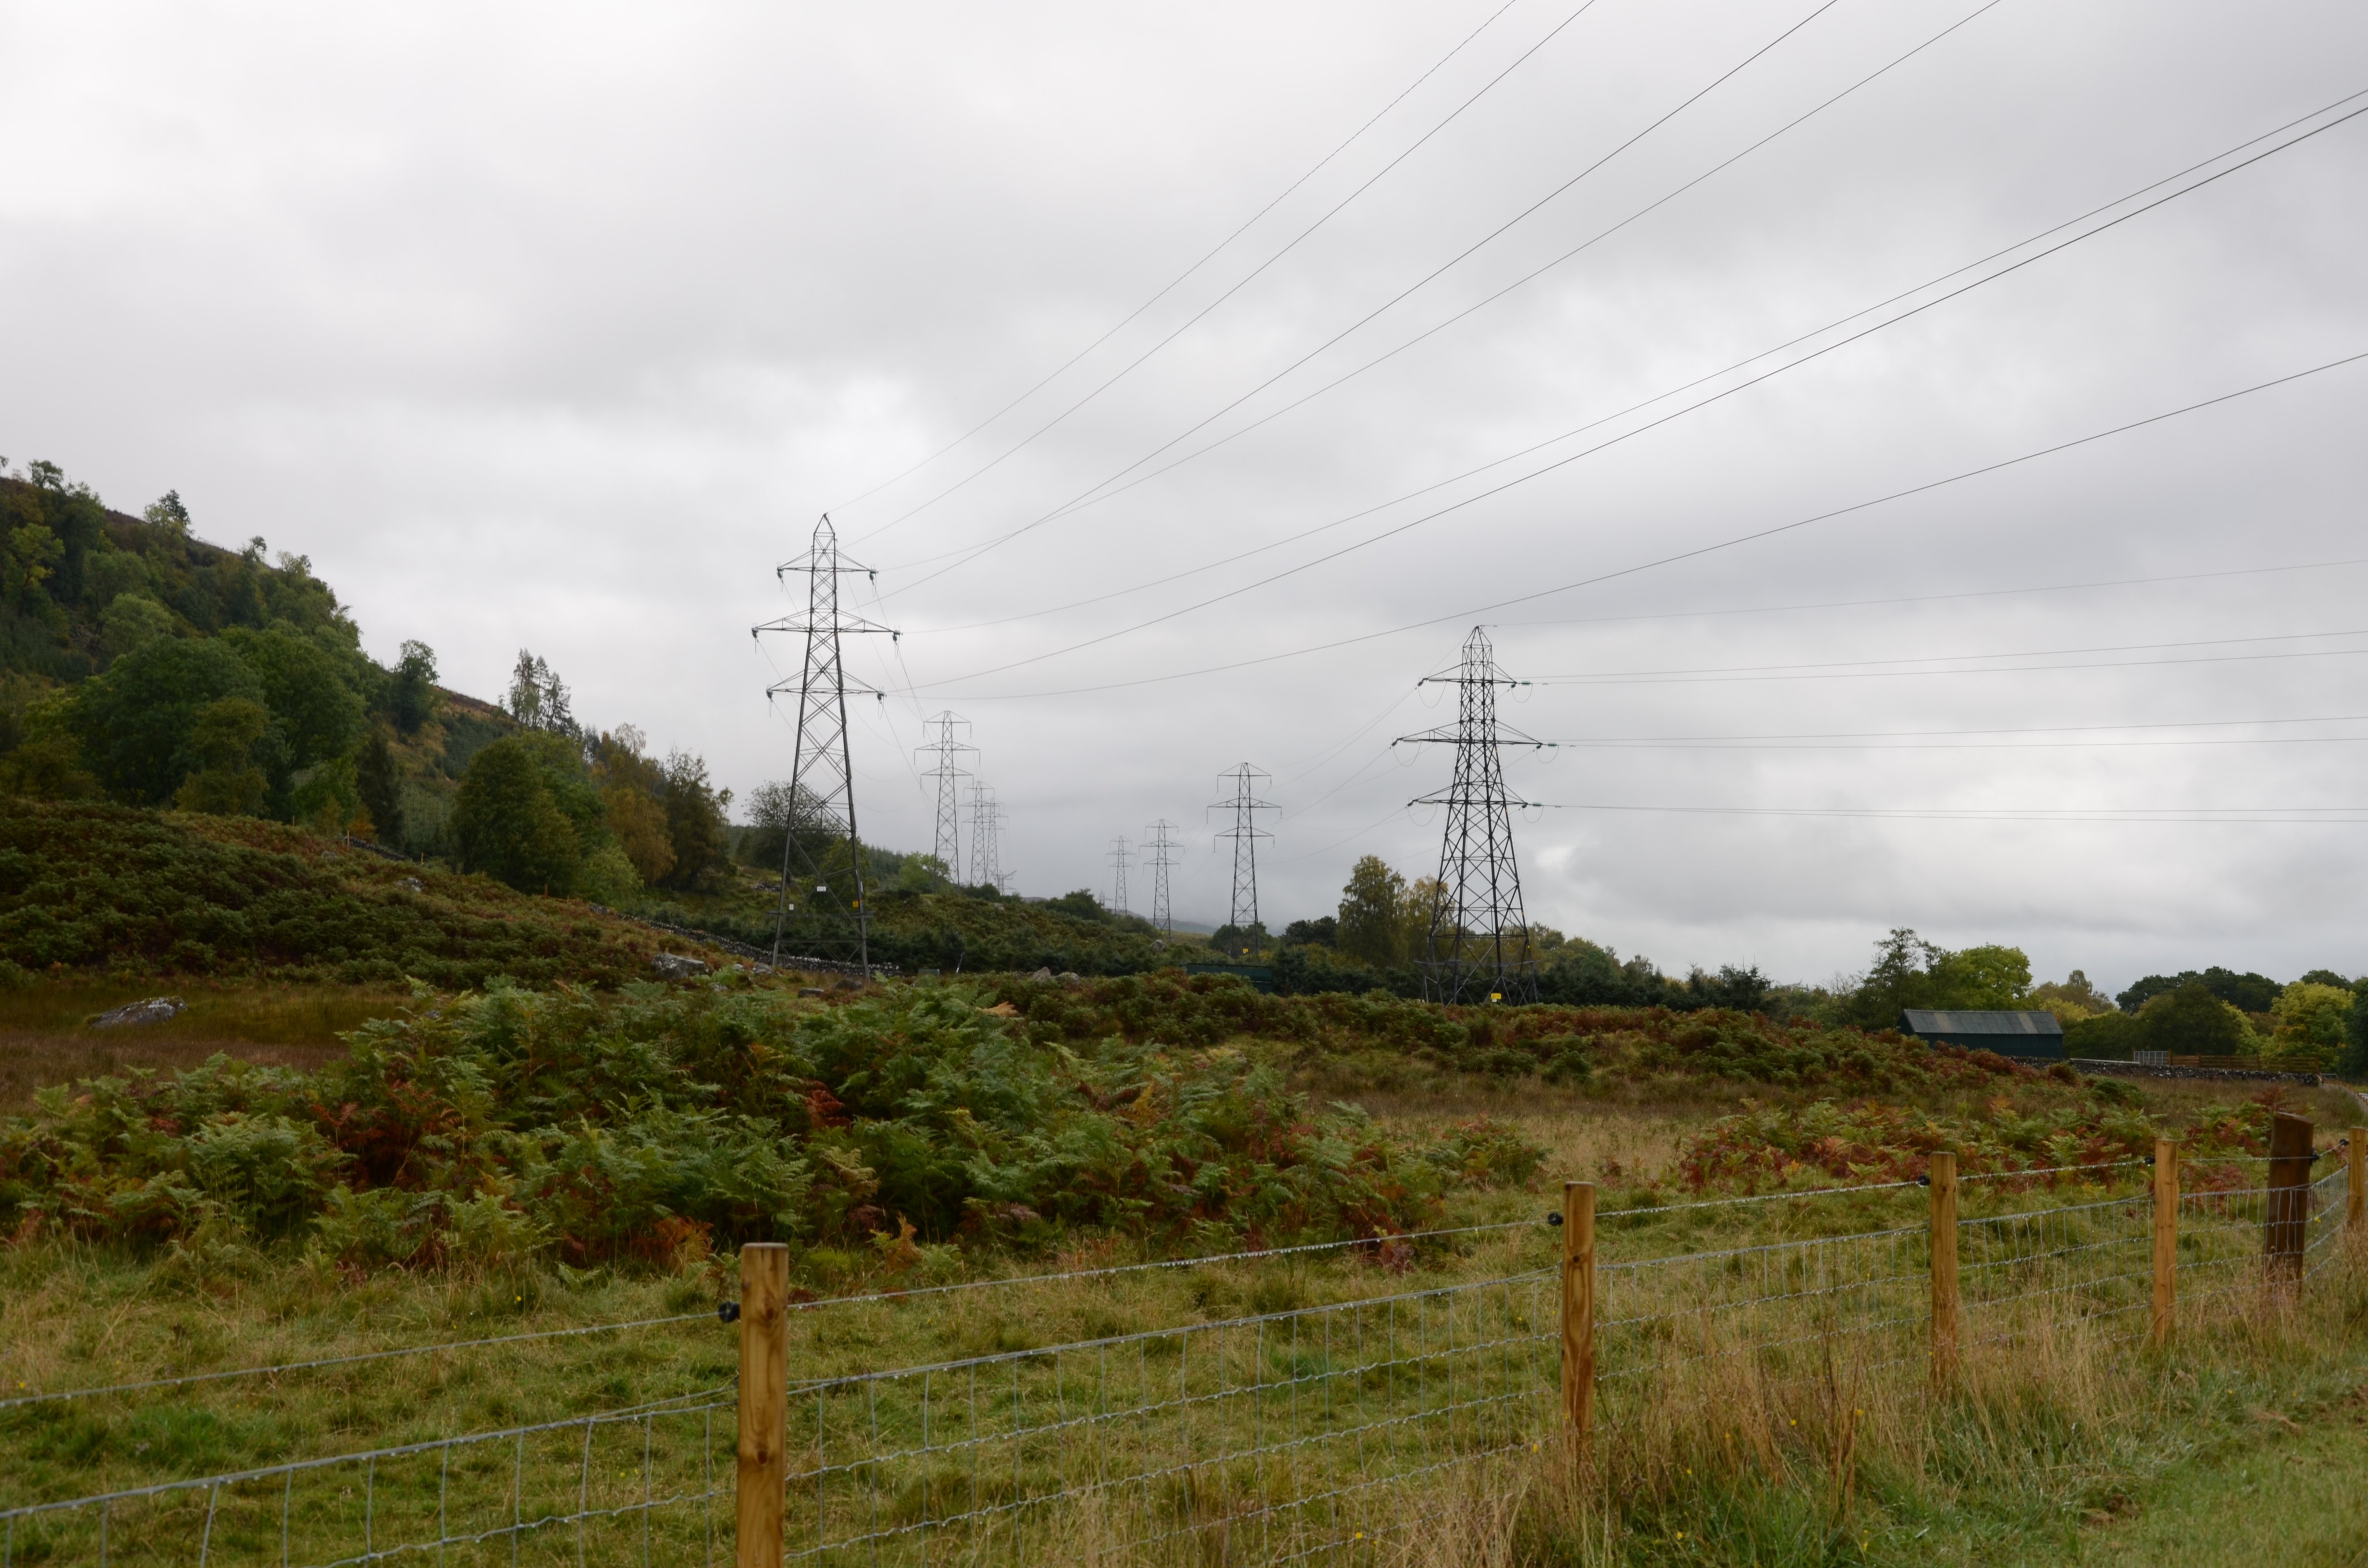 Two overhead lines composed of metal transmission towers.